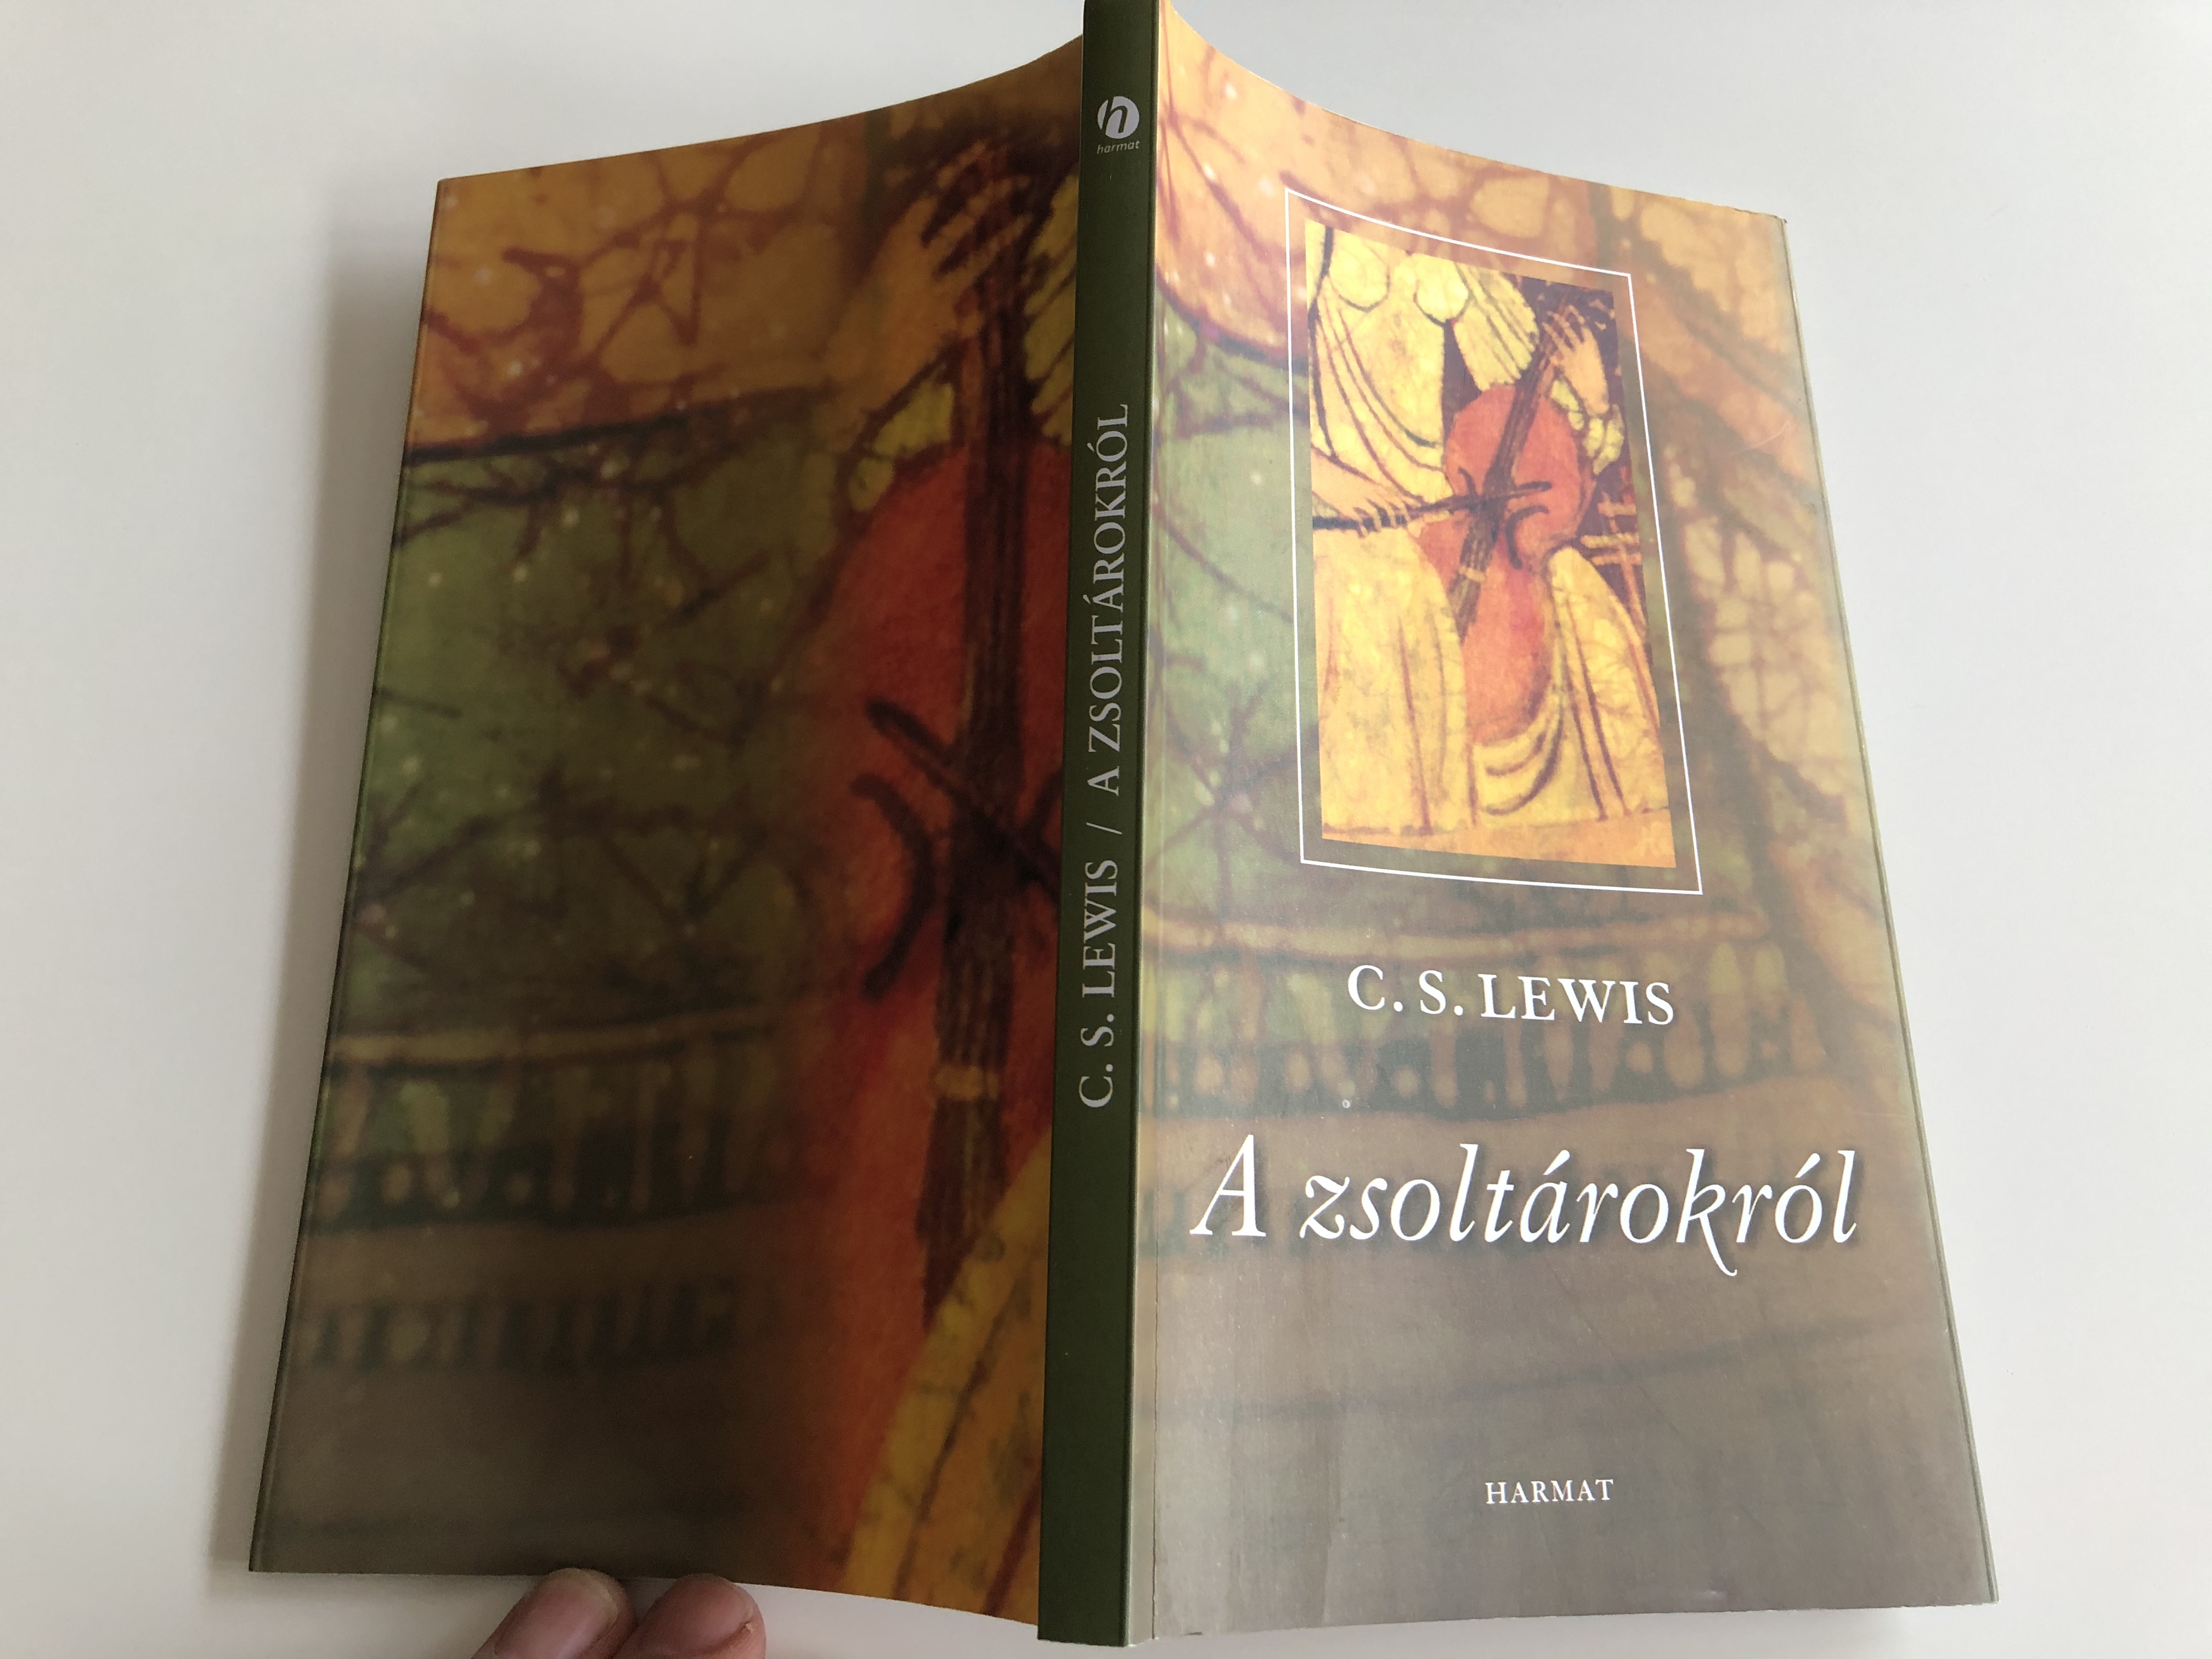 a-zsolt-rokr-l-by-c.-s.-lewis-hungarian-edition-of-reflections-on-the-psalms-8.jpg